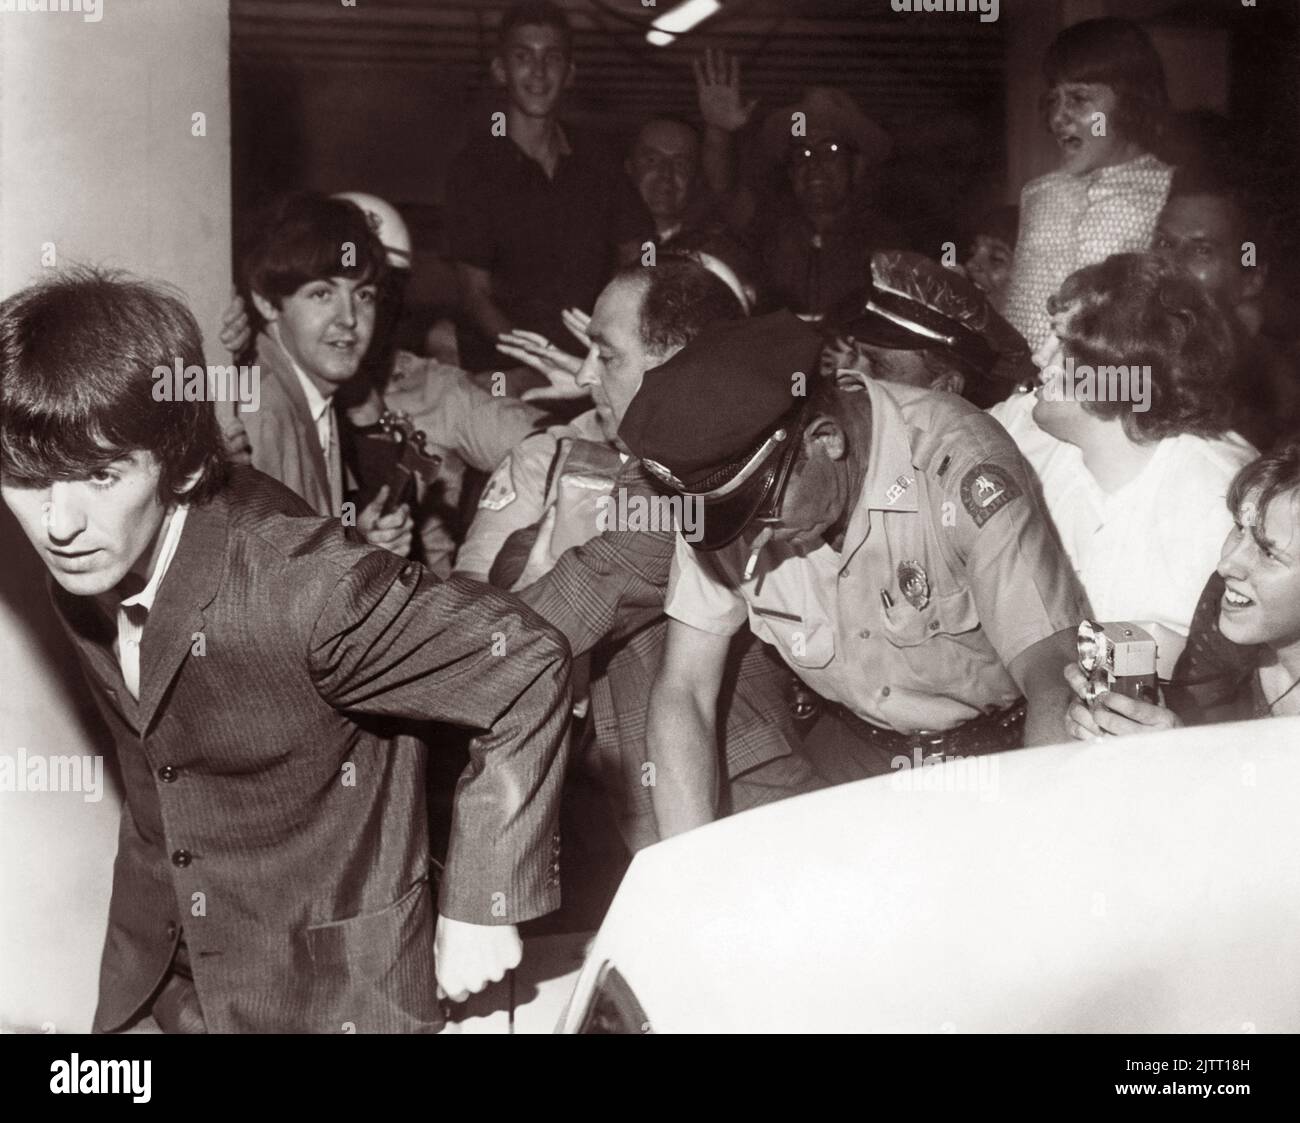 The Beatles (George Harrison in the foreground and Paul McCartney behind him) leaving the George Washington Hotel with police trying to control the pressing fans as the band headed for their Gator Bowl concert in Jacksonville, Florida, on September 11, 1964. (USA) Stock Photo